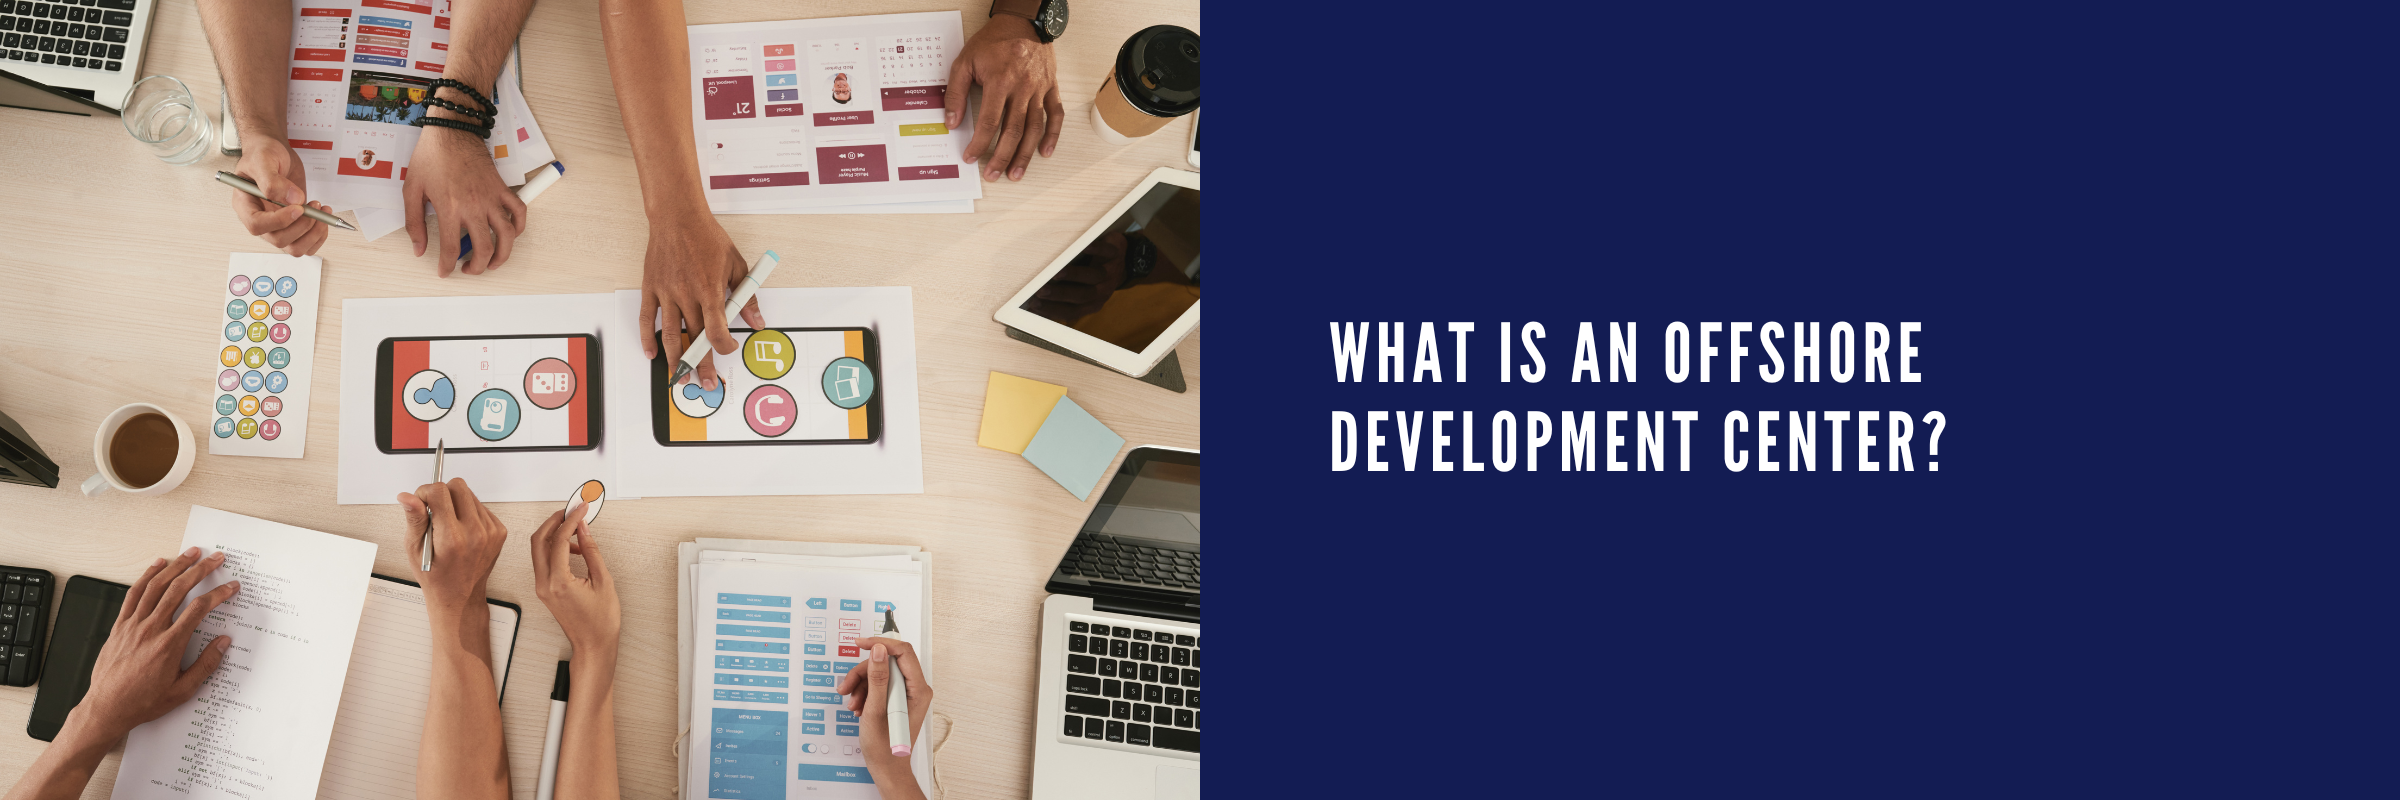 What is an offshore development center?